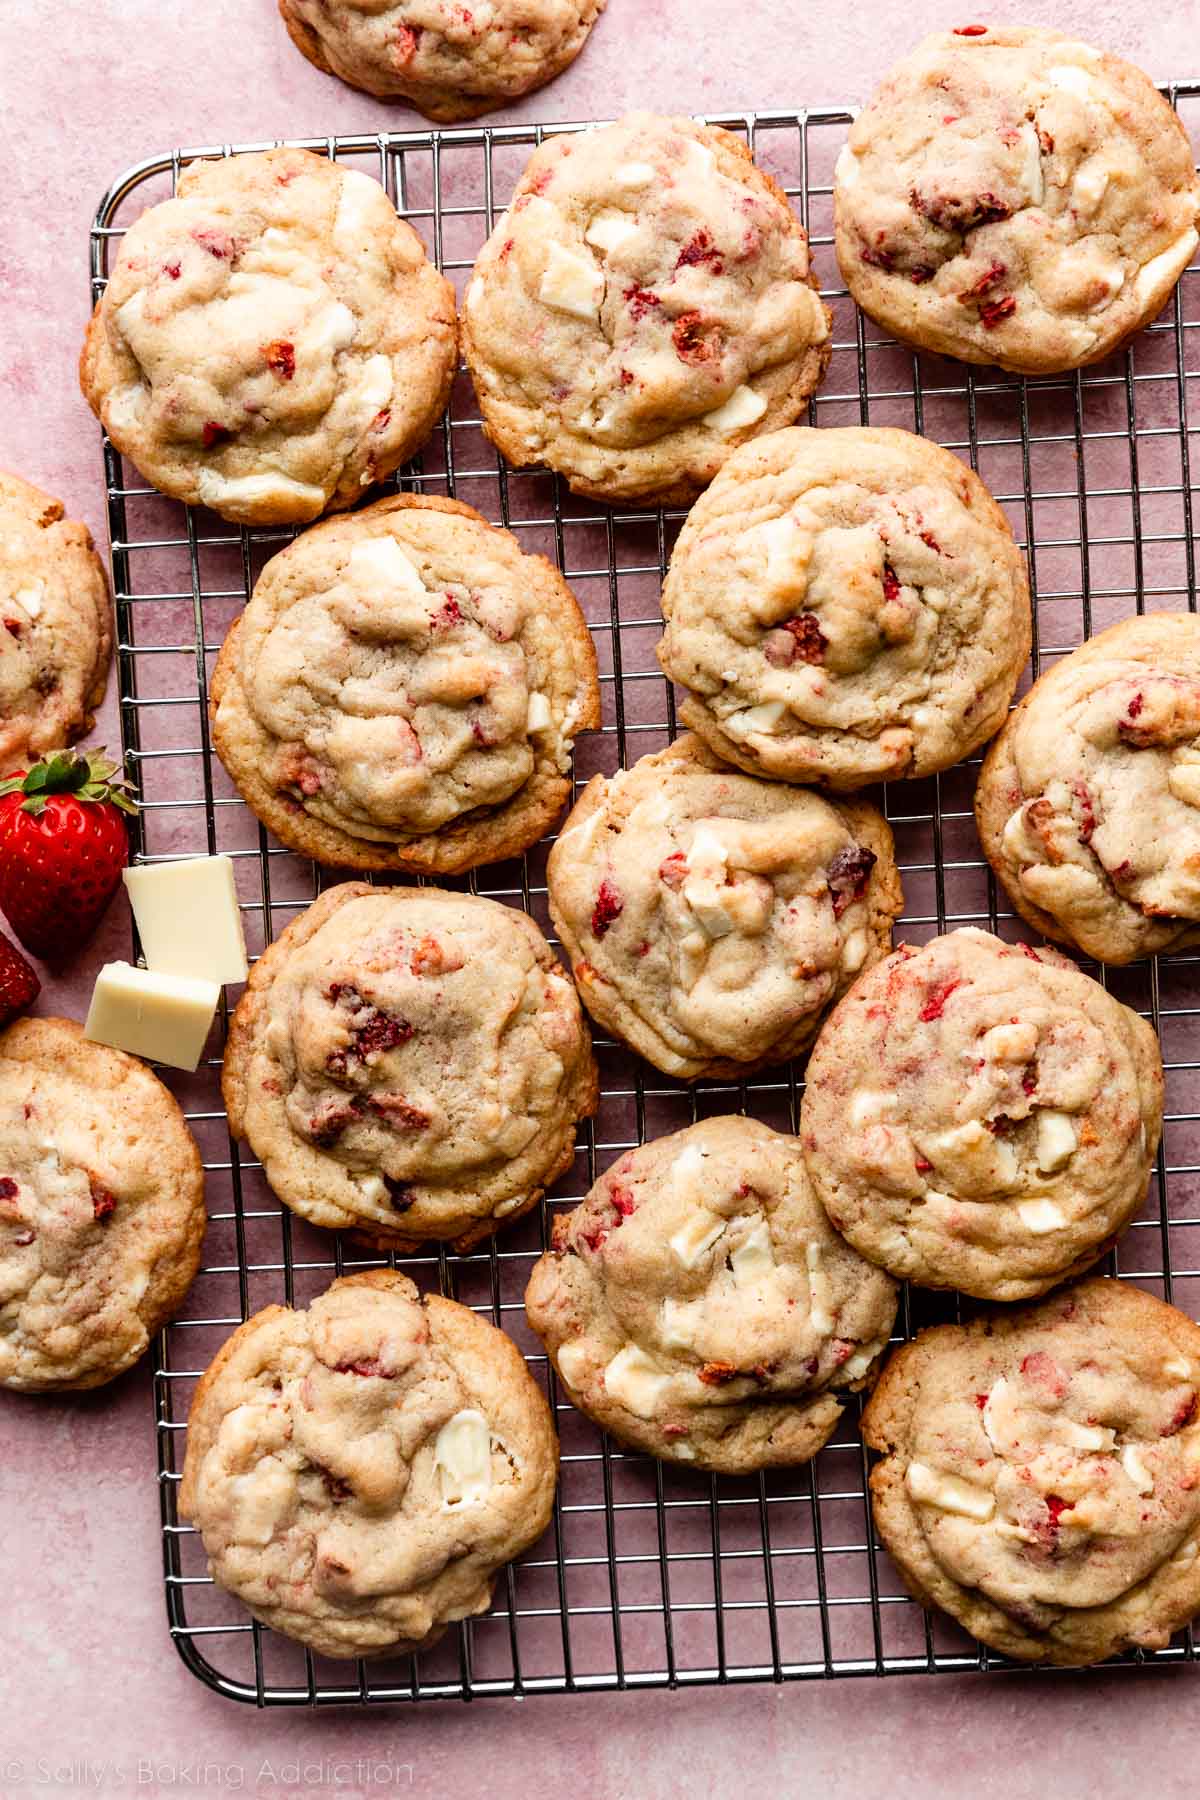 strawberry and white chocolate cookies on wire cooling rack.